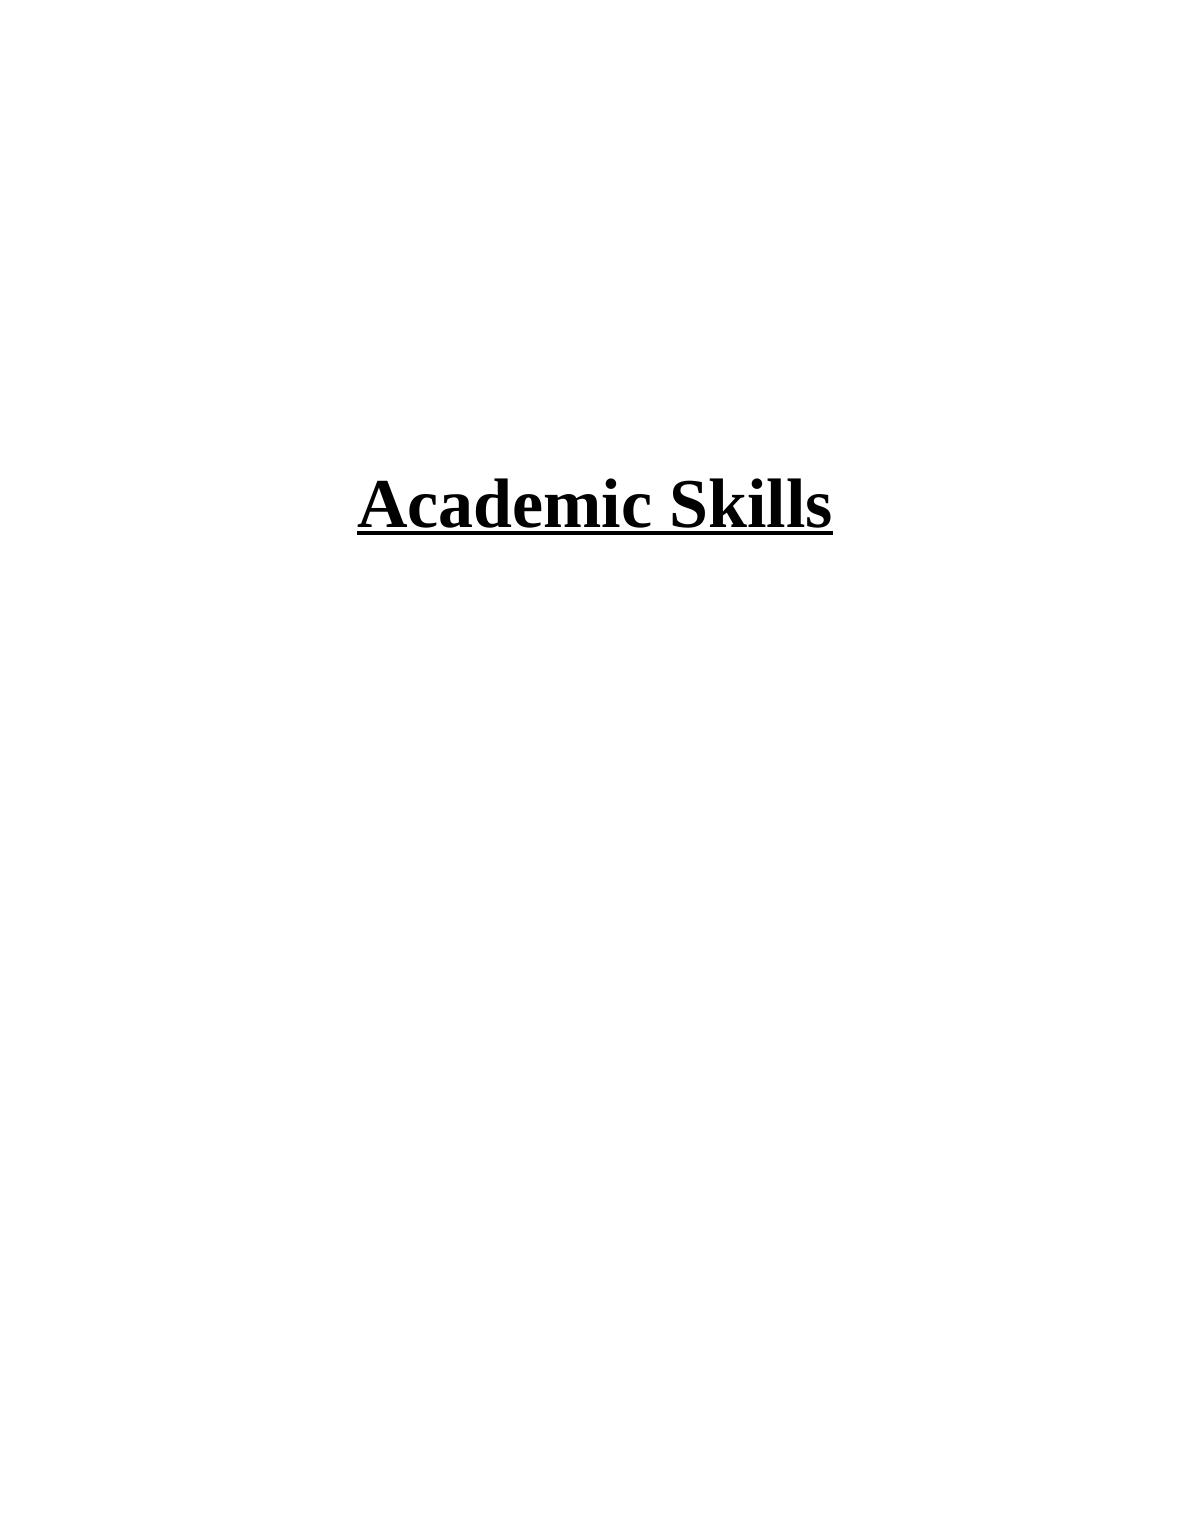 Academic Skills Importance Integrity And Implications 4577